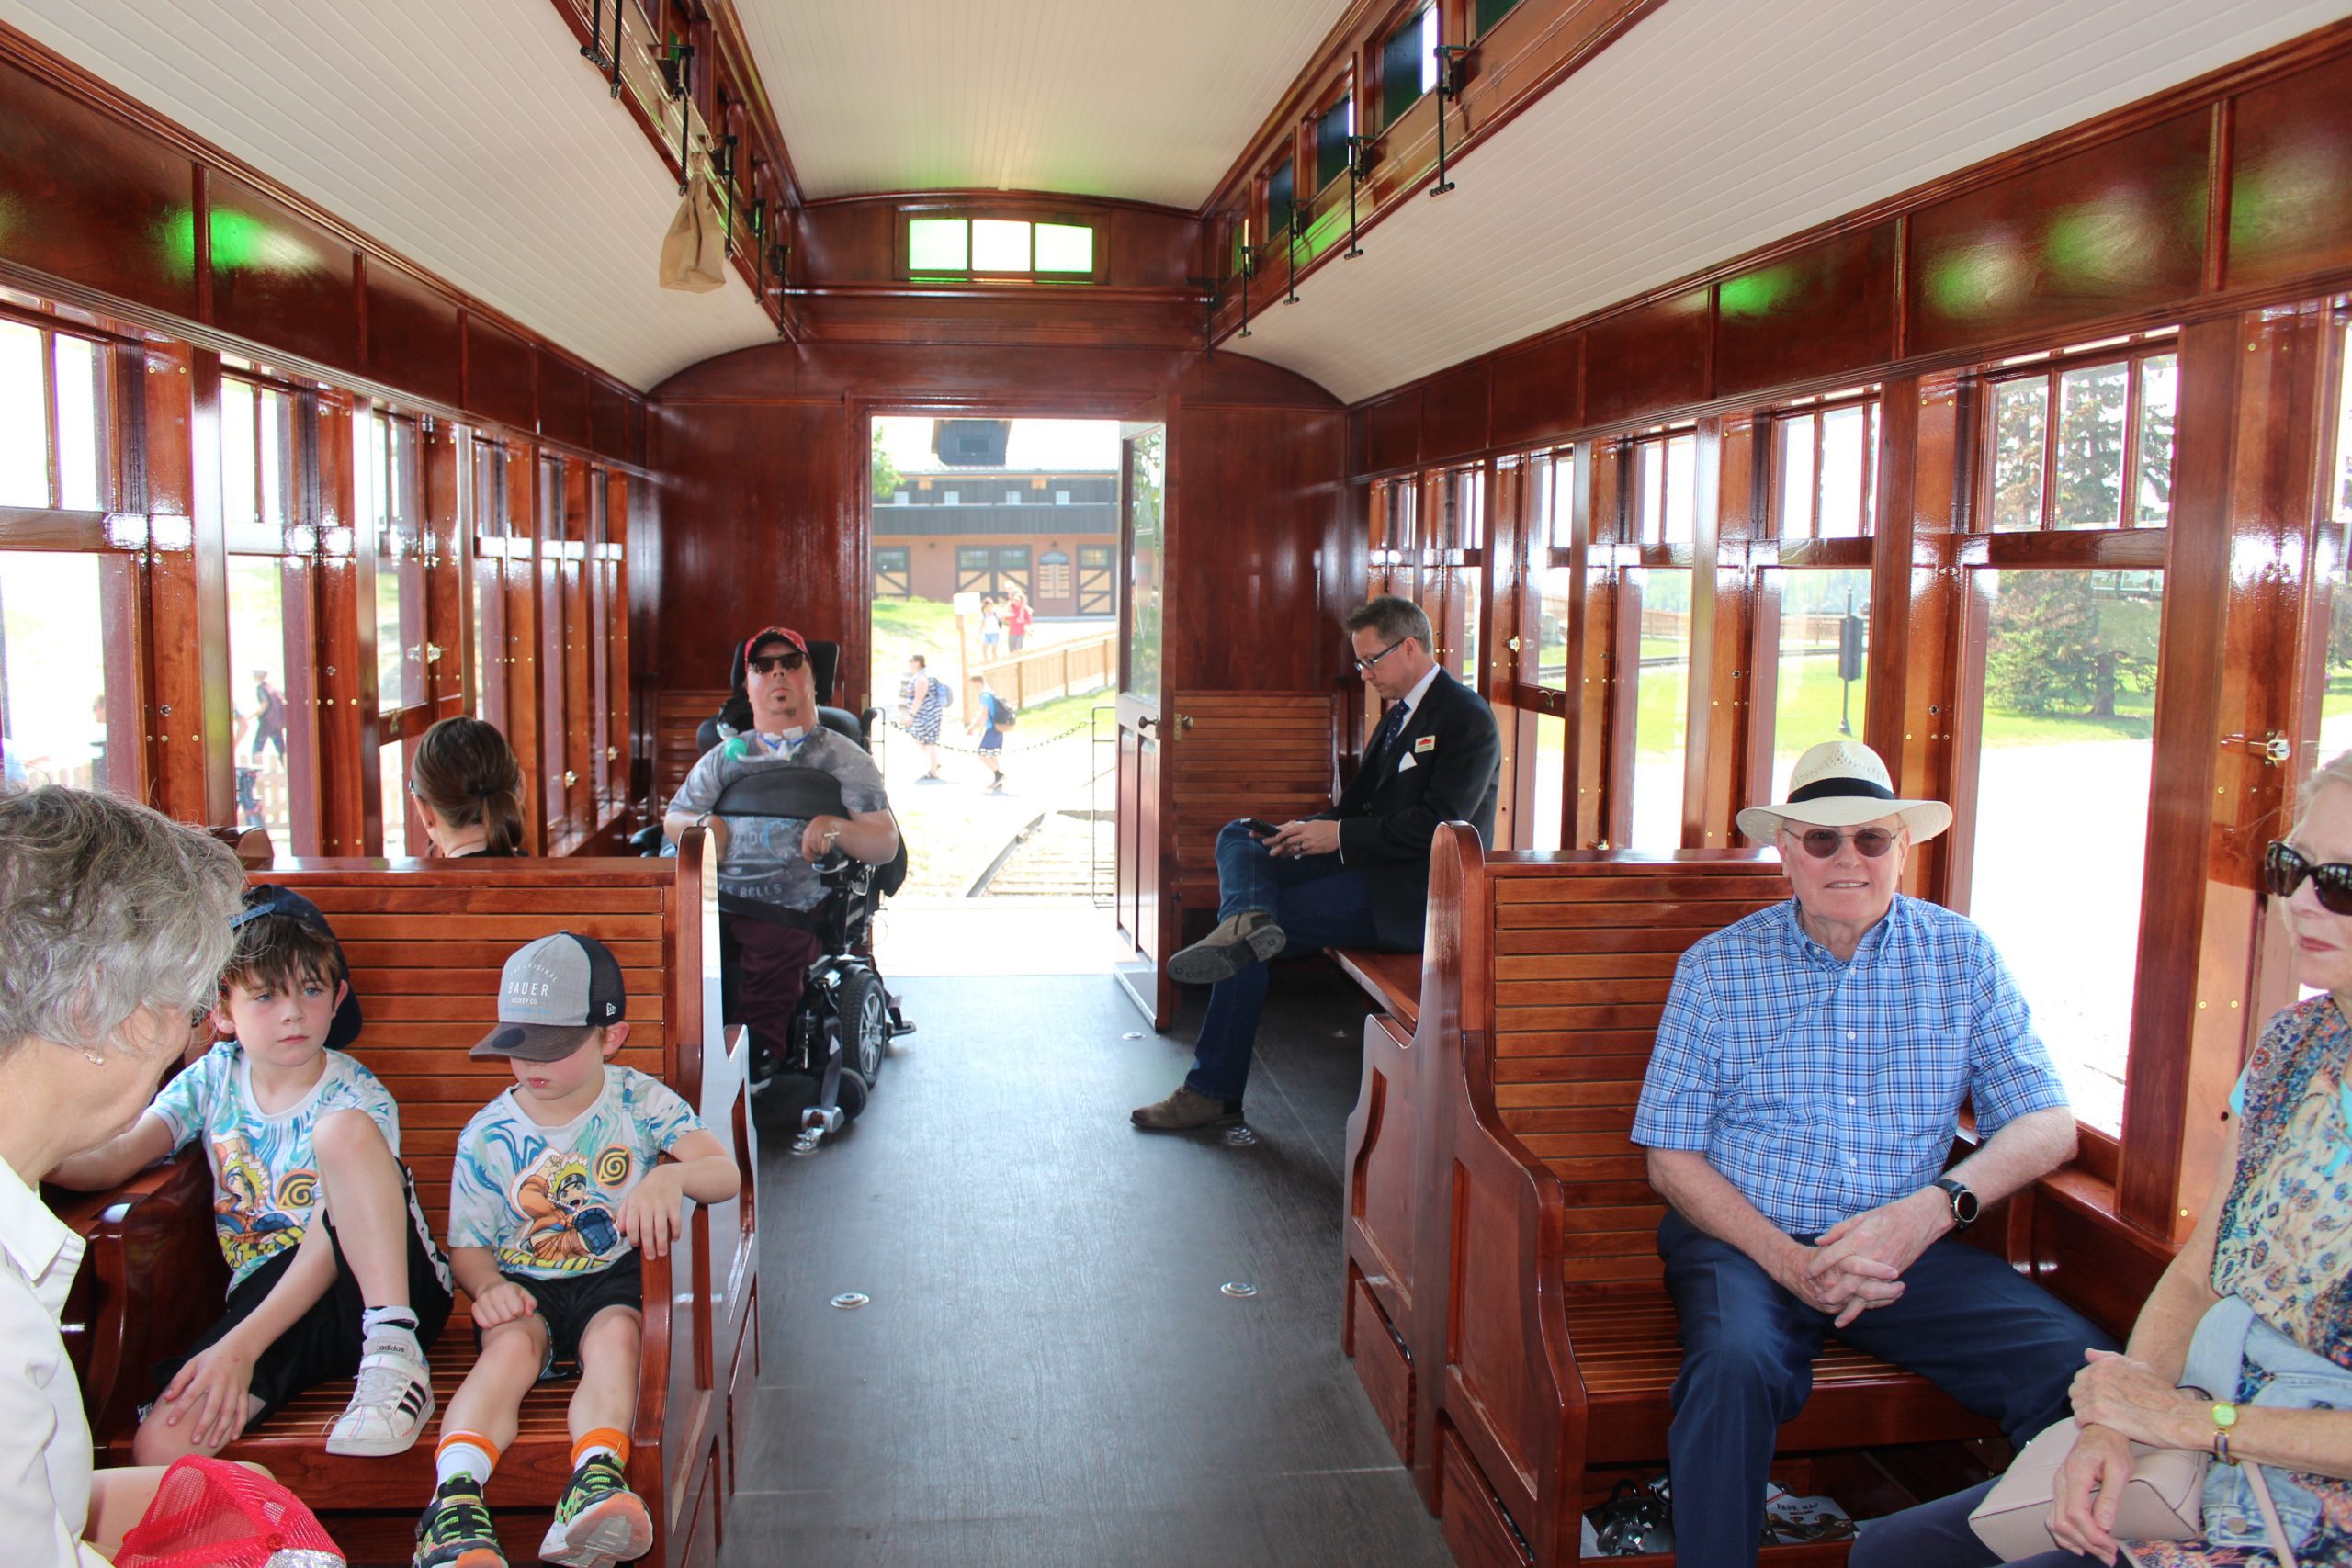 Interior shot of Heritage Park's fully accessible railcar, with people sitting in it.